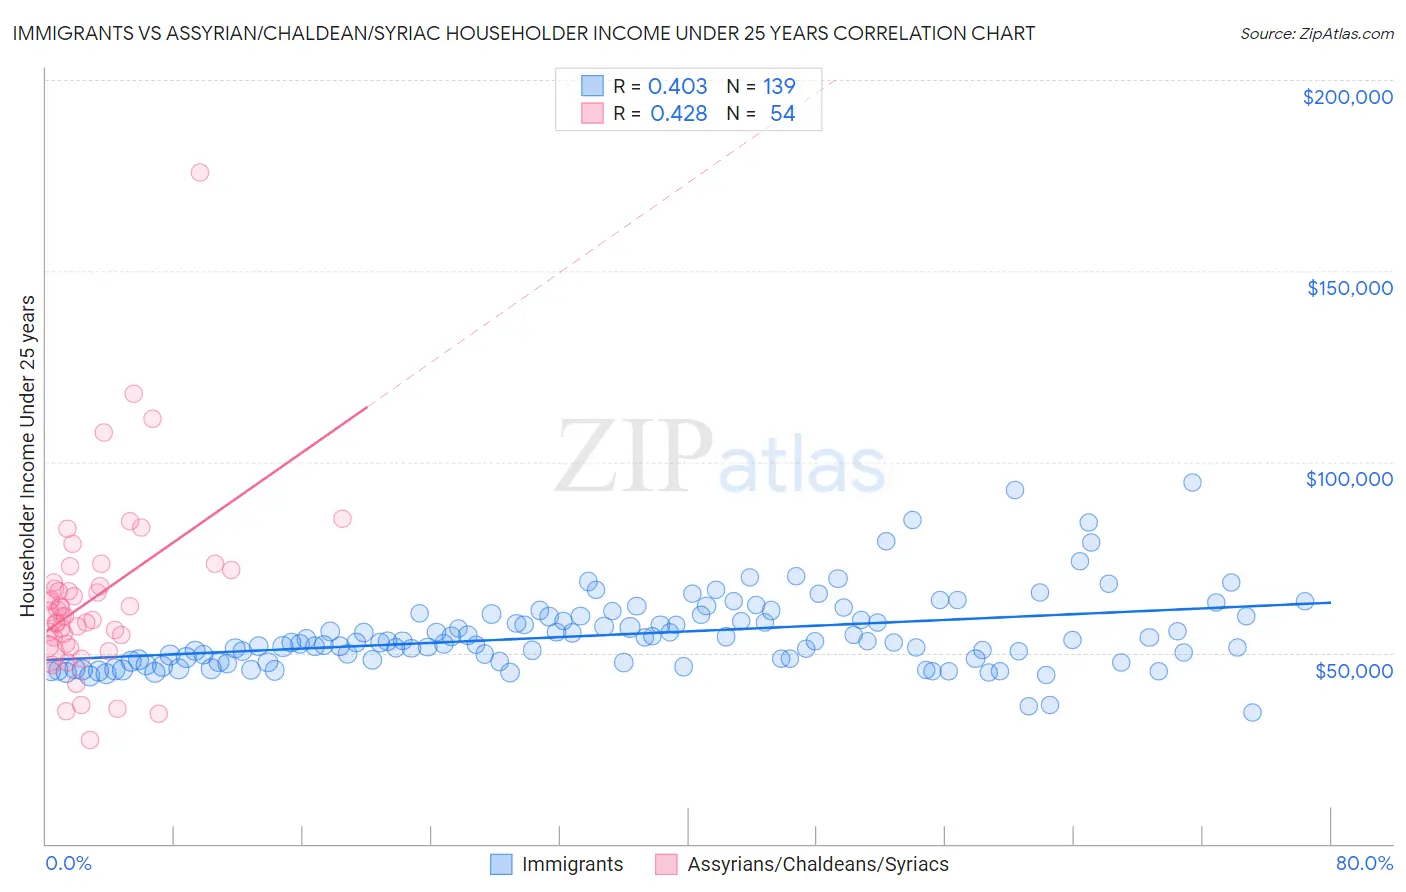 Immigrants vs Assyrian/Chaldean/Syriac Householder Income Under 25 years